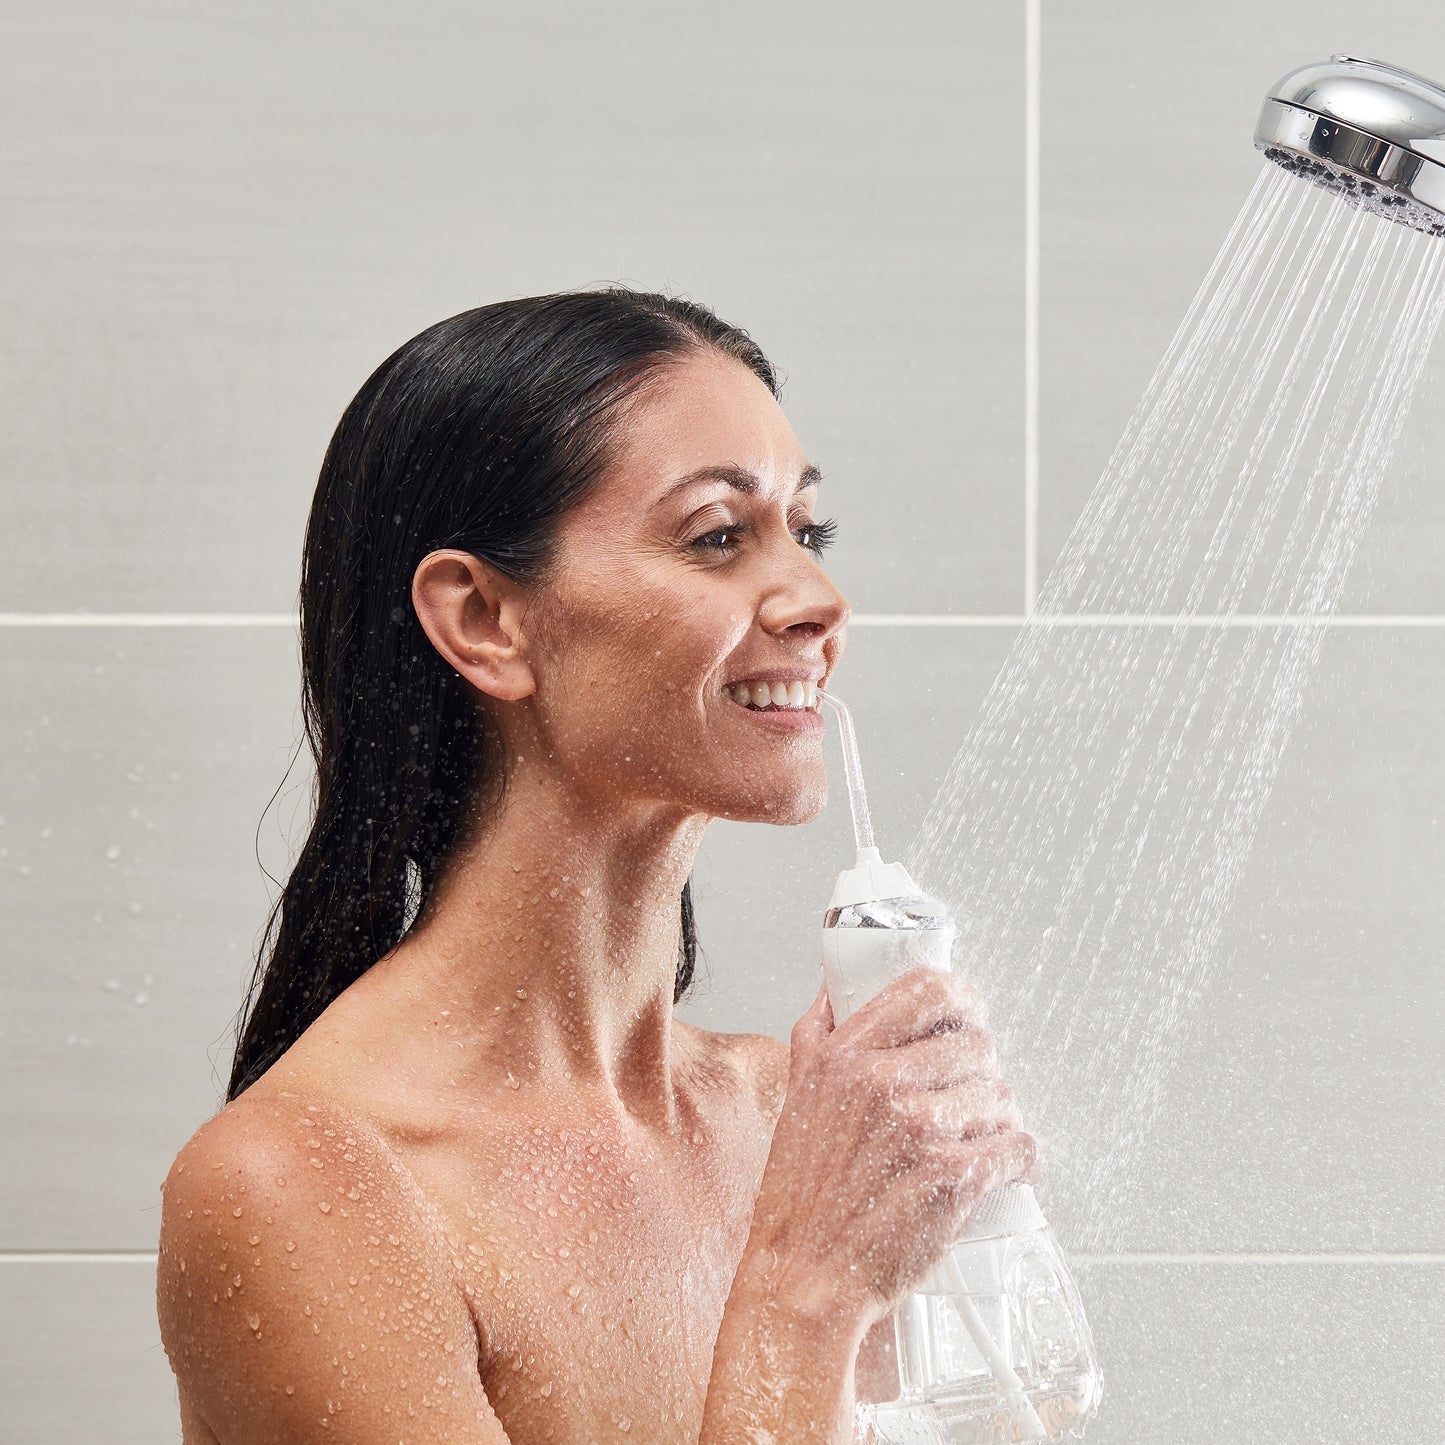 Using White Cordless Advanced Water Flosser WP-580 in the Shower